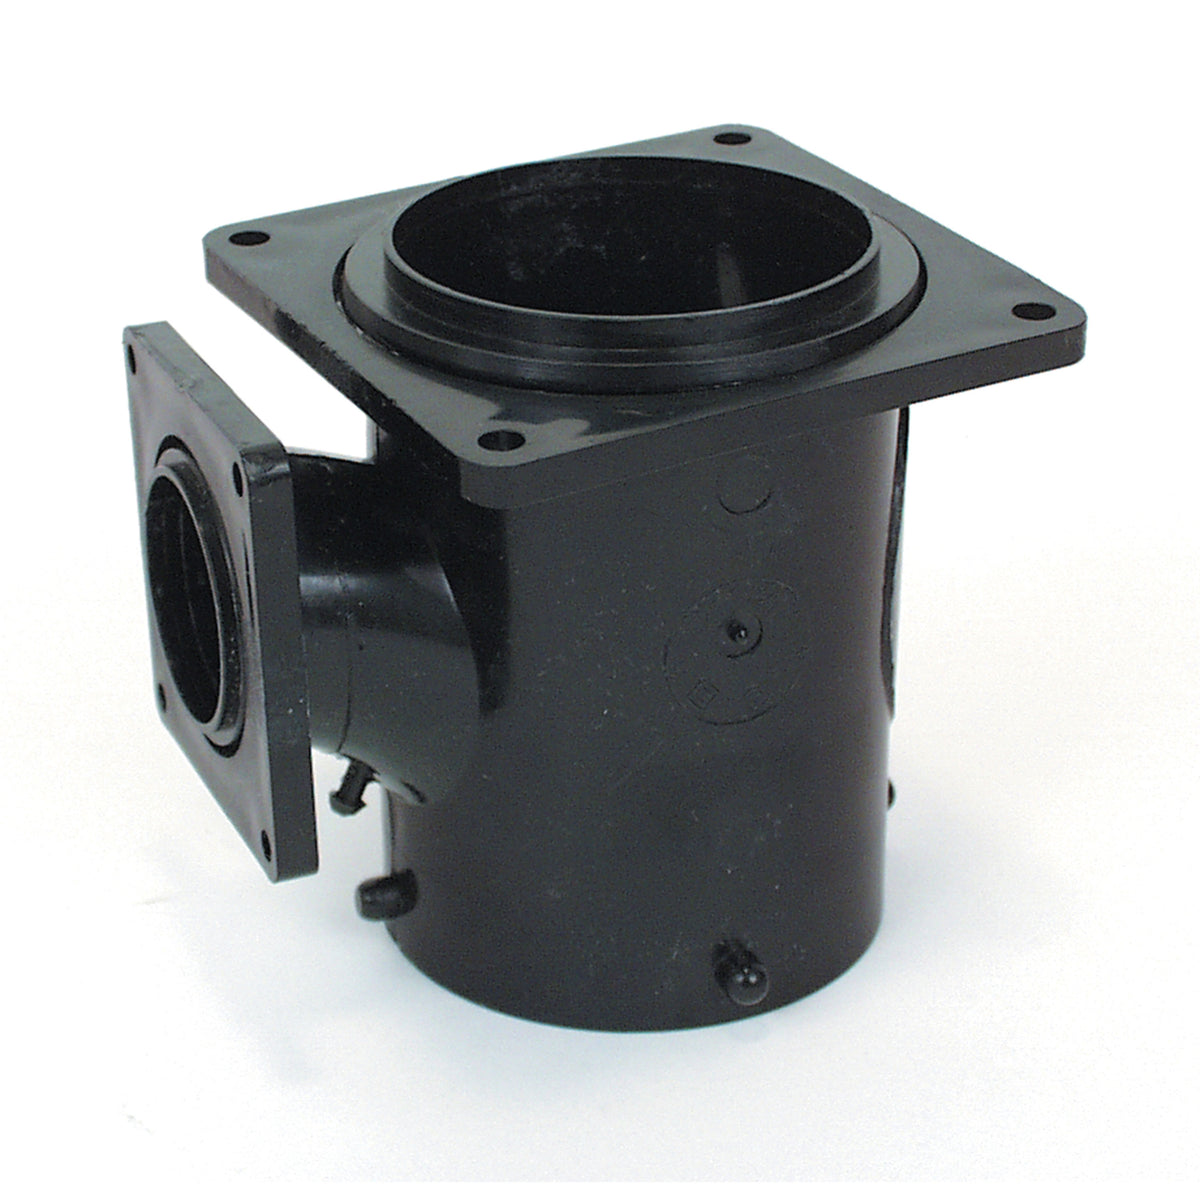 Valterra T1010 Flanged Valve Fitting - 3" San Tee Reducing, 3" Bayonet x 3" and 1-1/2" Rotating Flange